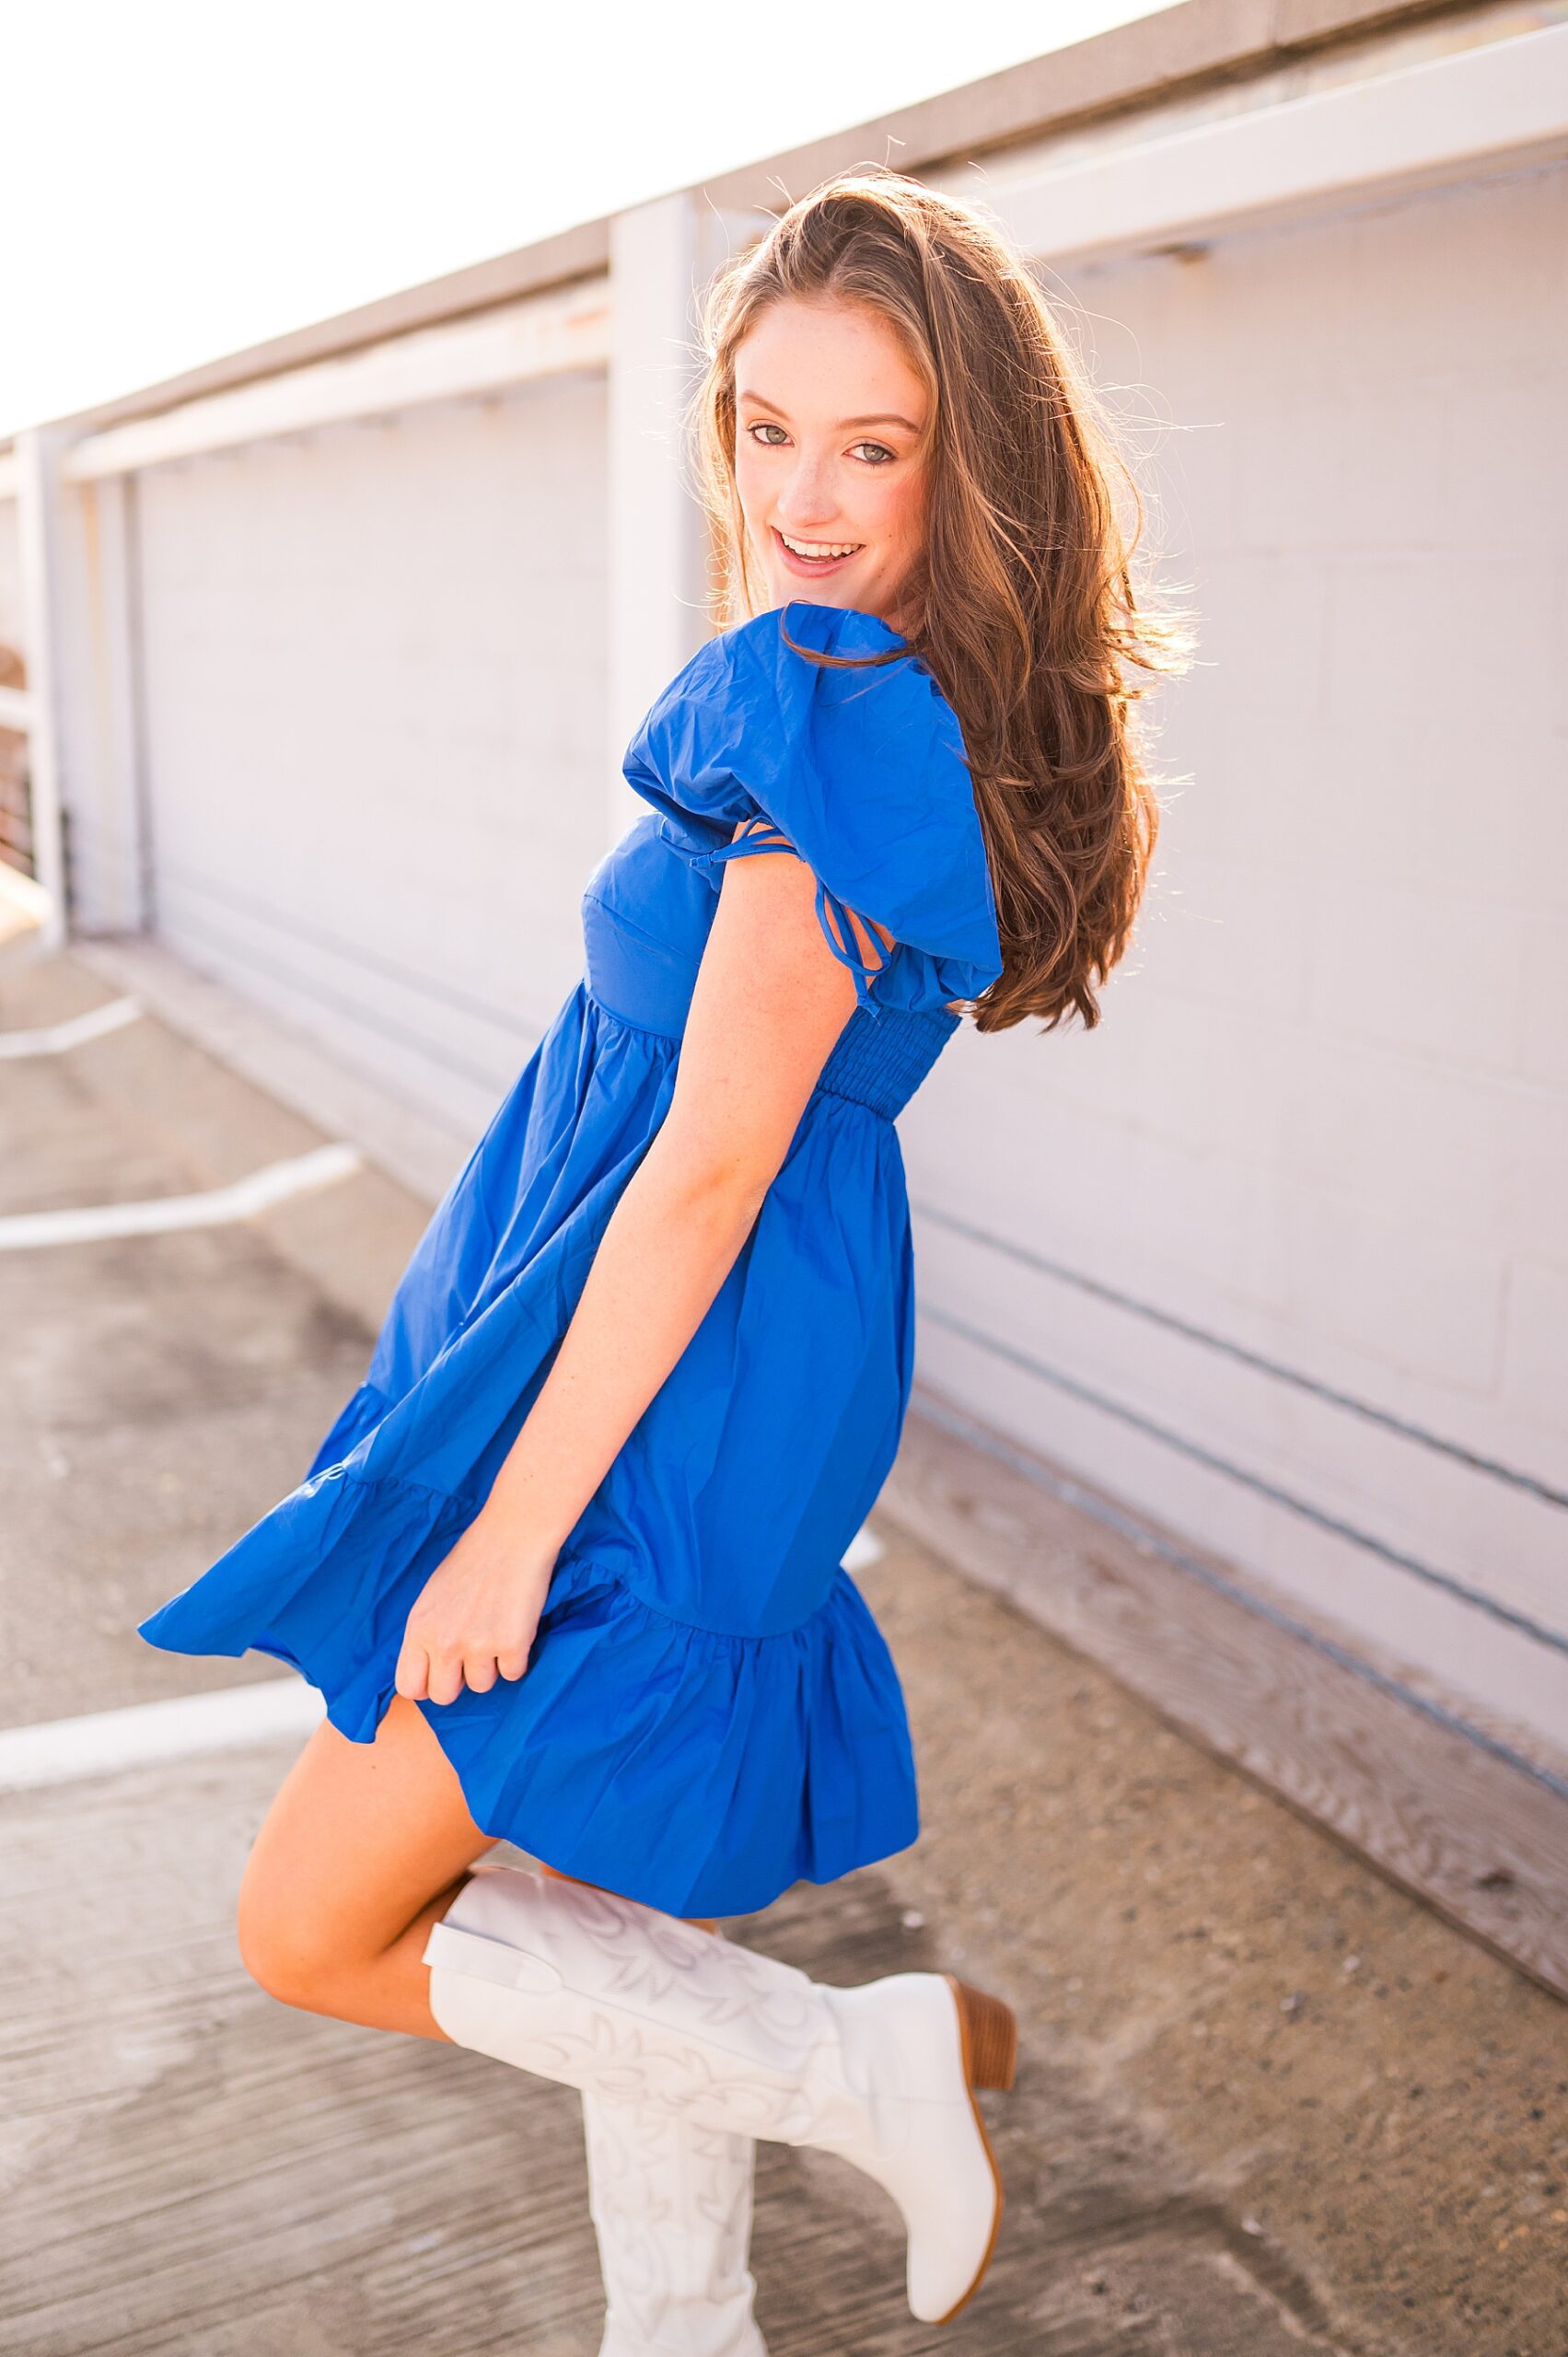 senior girl in blue dress and white cowboy boots